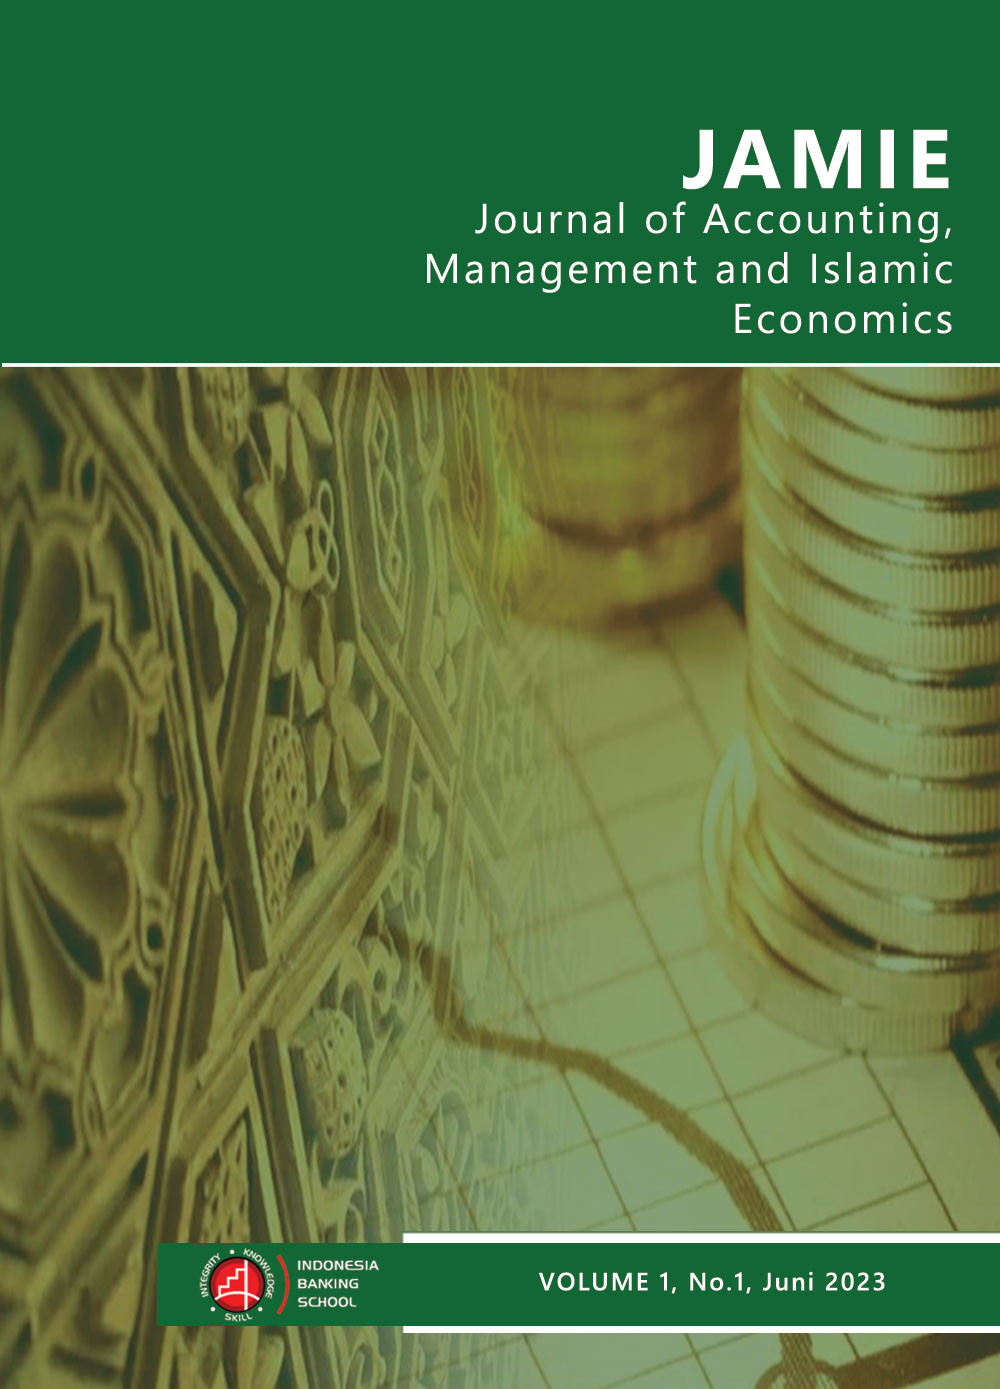 					View Vol. 1 No. 1 (2023): Journal of Accounting, Management, And Islamic Economics, Volume 01, No. 01, Juni 2023
				